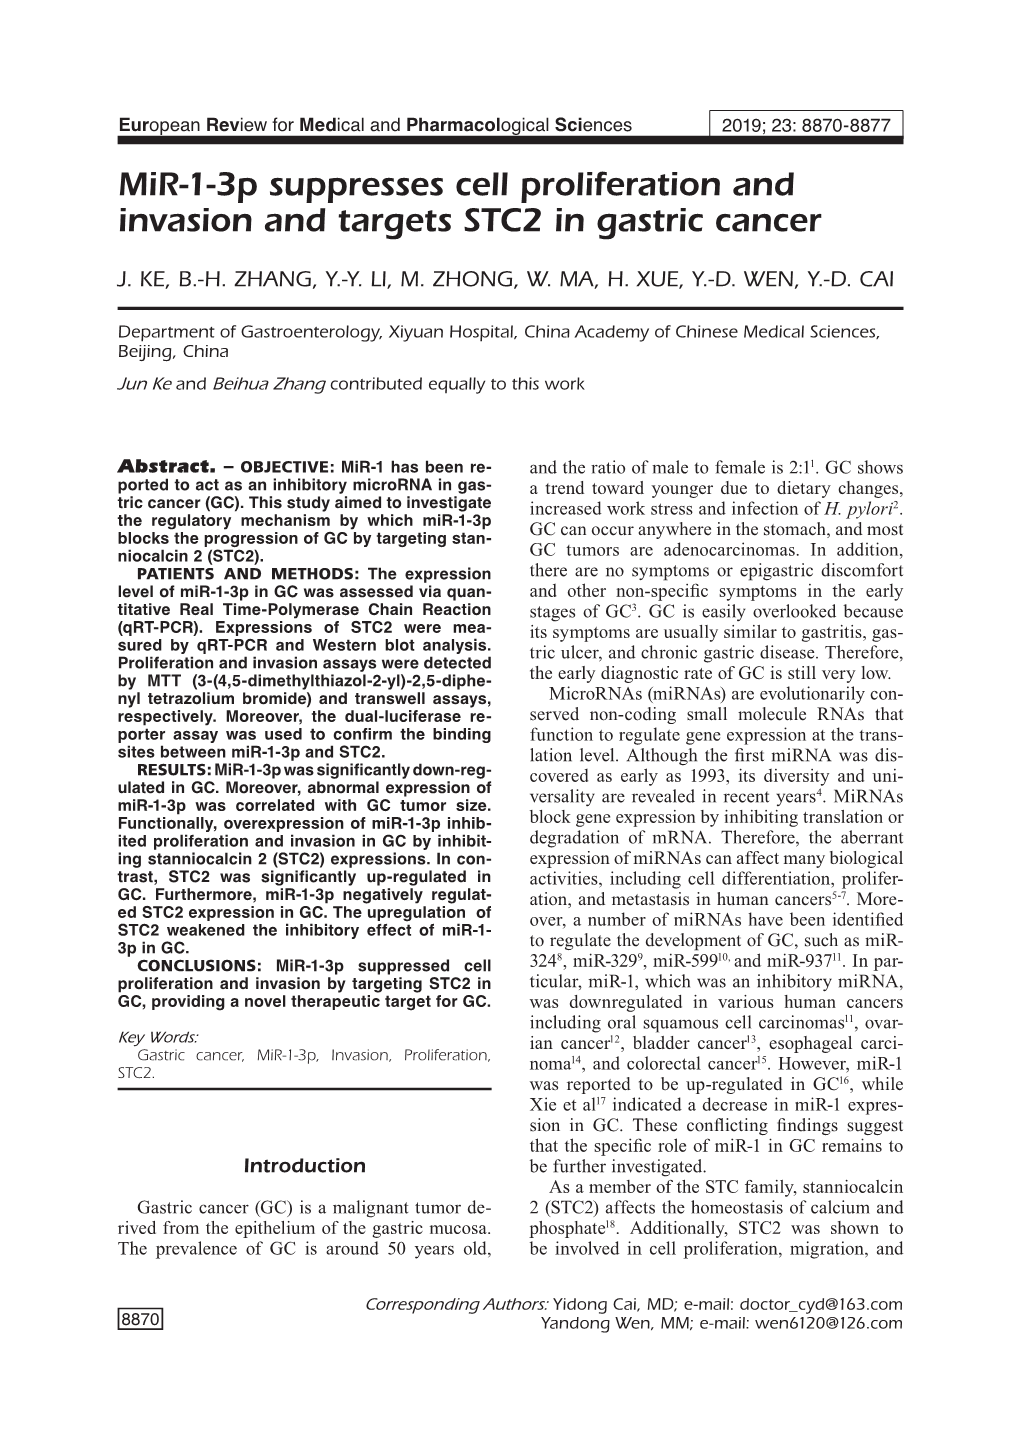 Mir-1-3P Suppresses Cell Proliferation and Invasion and Targets STC2 in Gastric Cancer